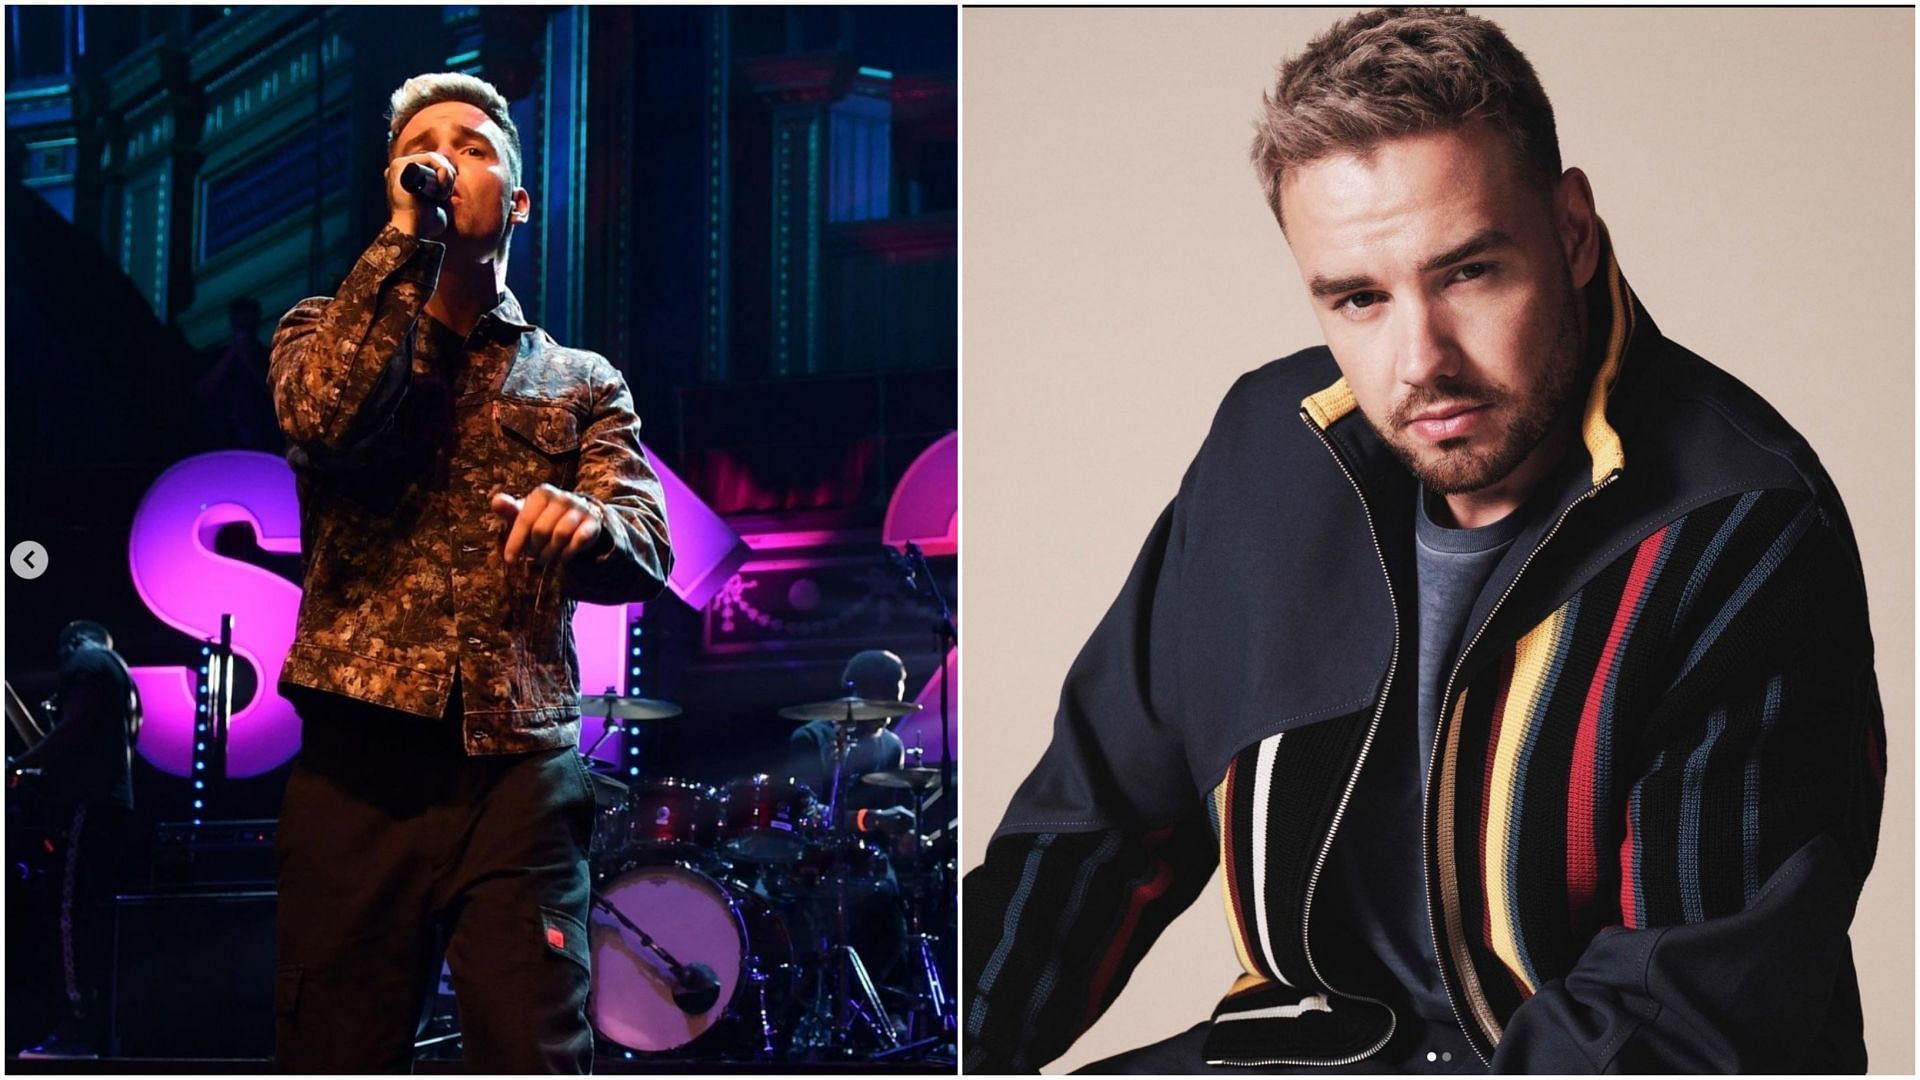 Liam Payne apologises to fans over dissing his former badnmate. (Images via Instagram / @liampayne)